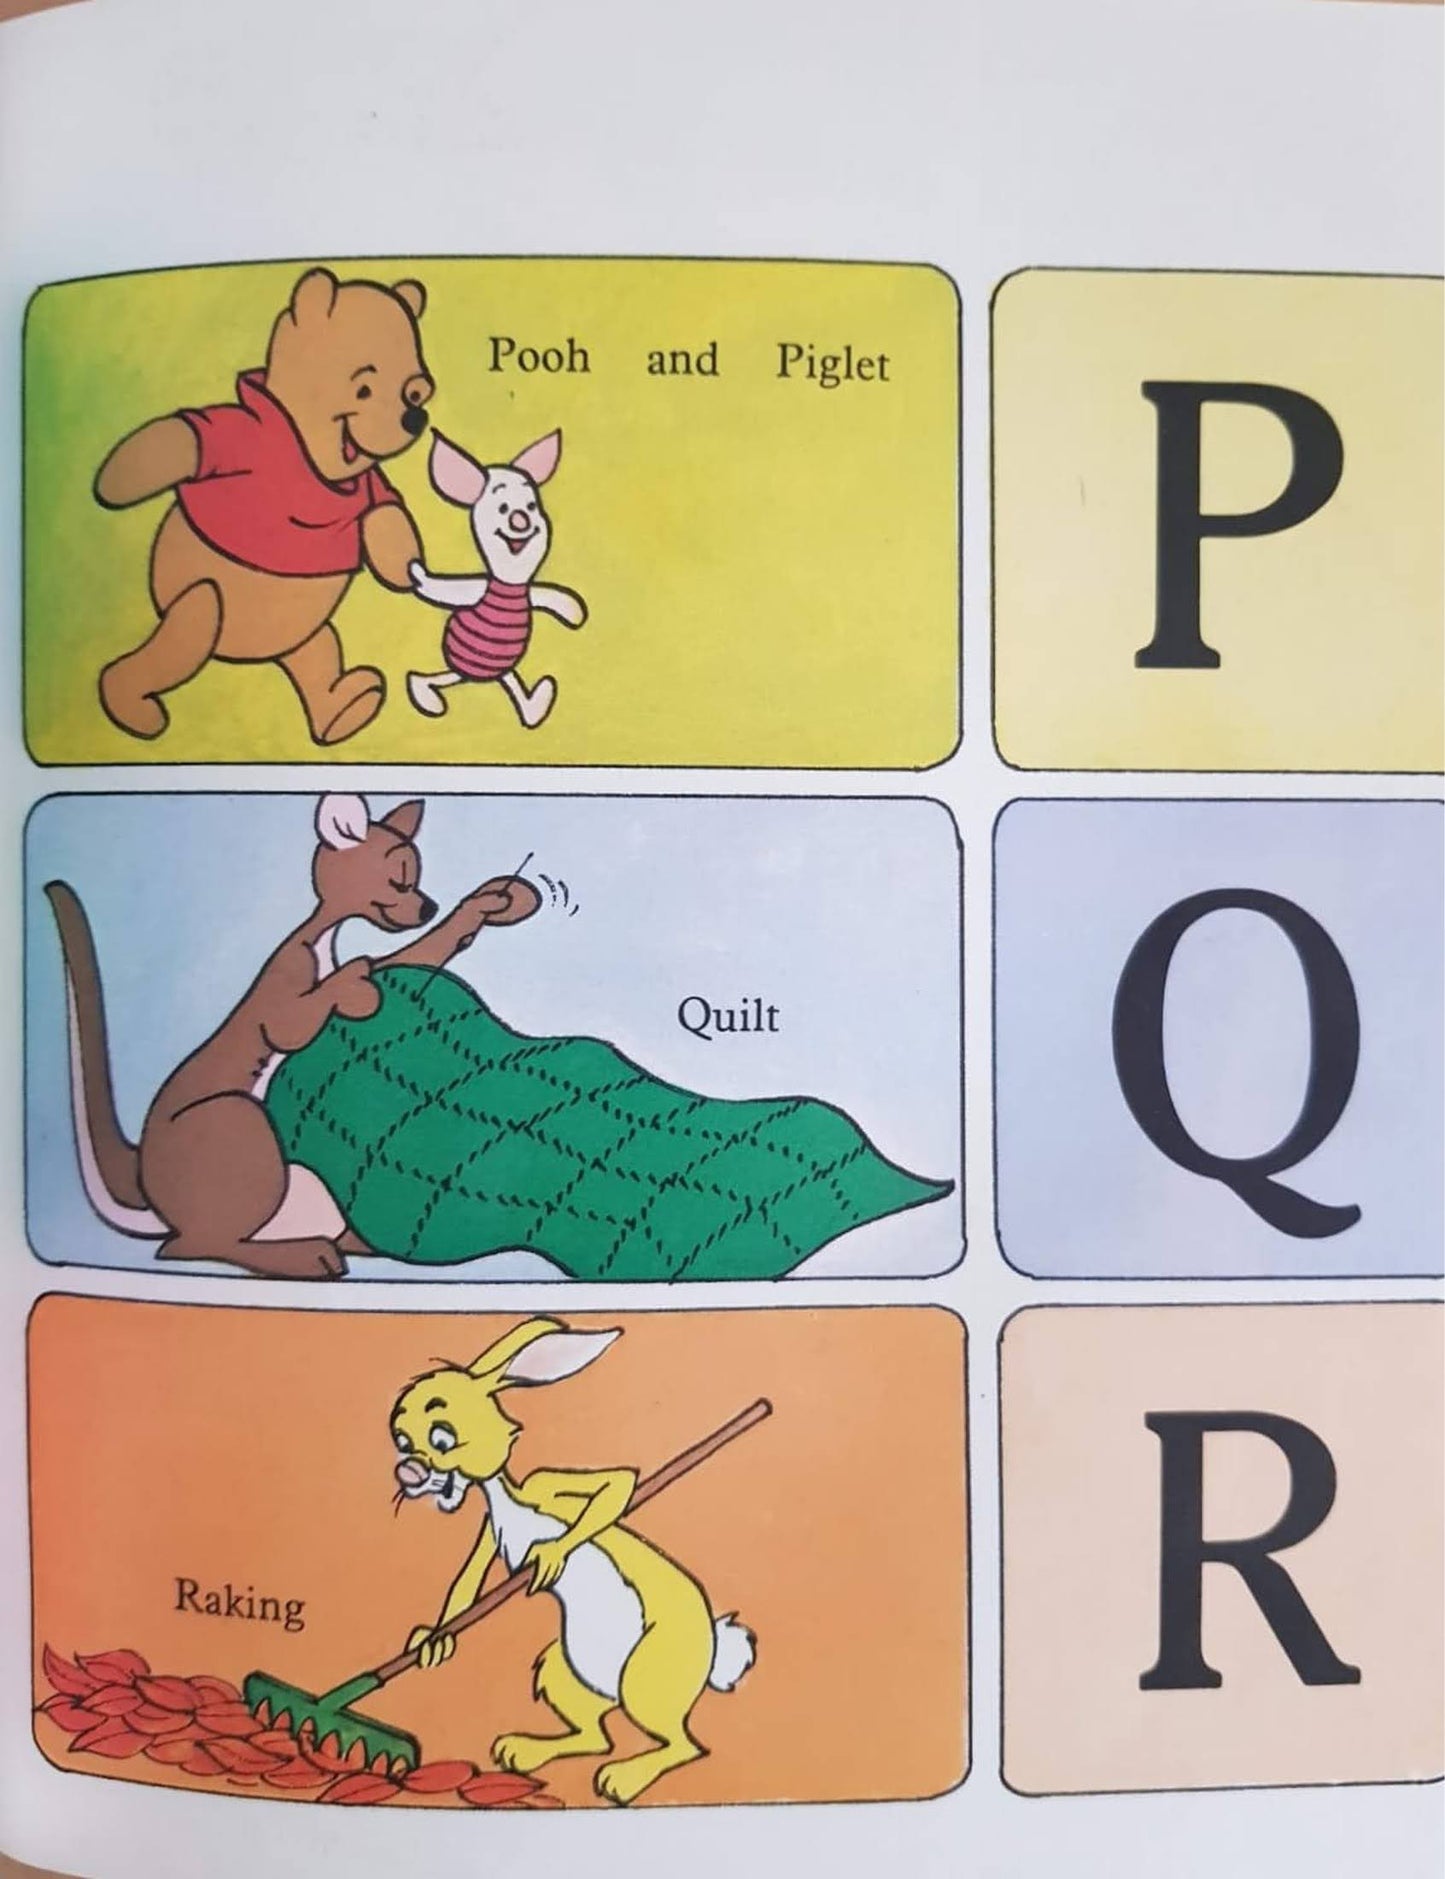 Pooh's Very Own First Book Like New Winnie the Pooh  (6203873263801)